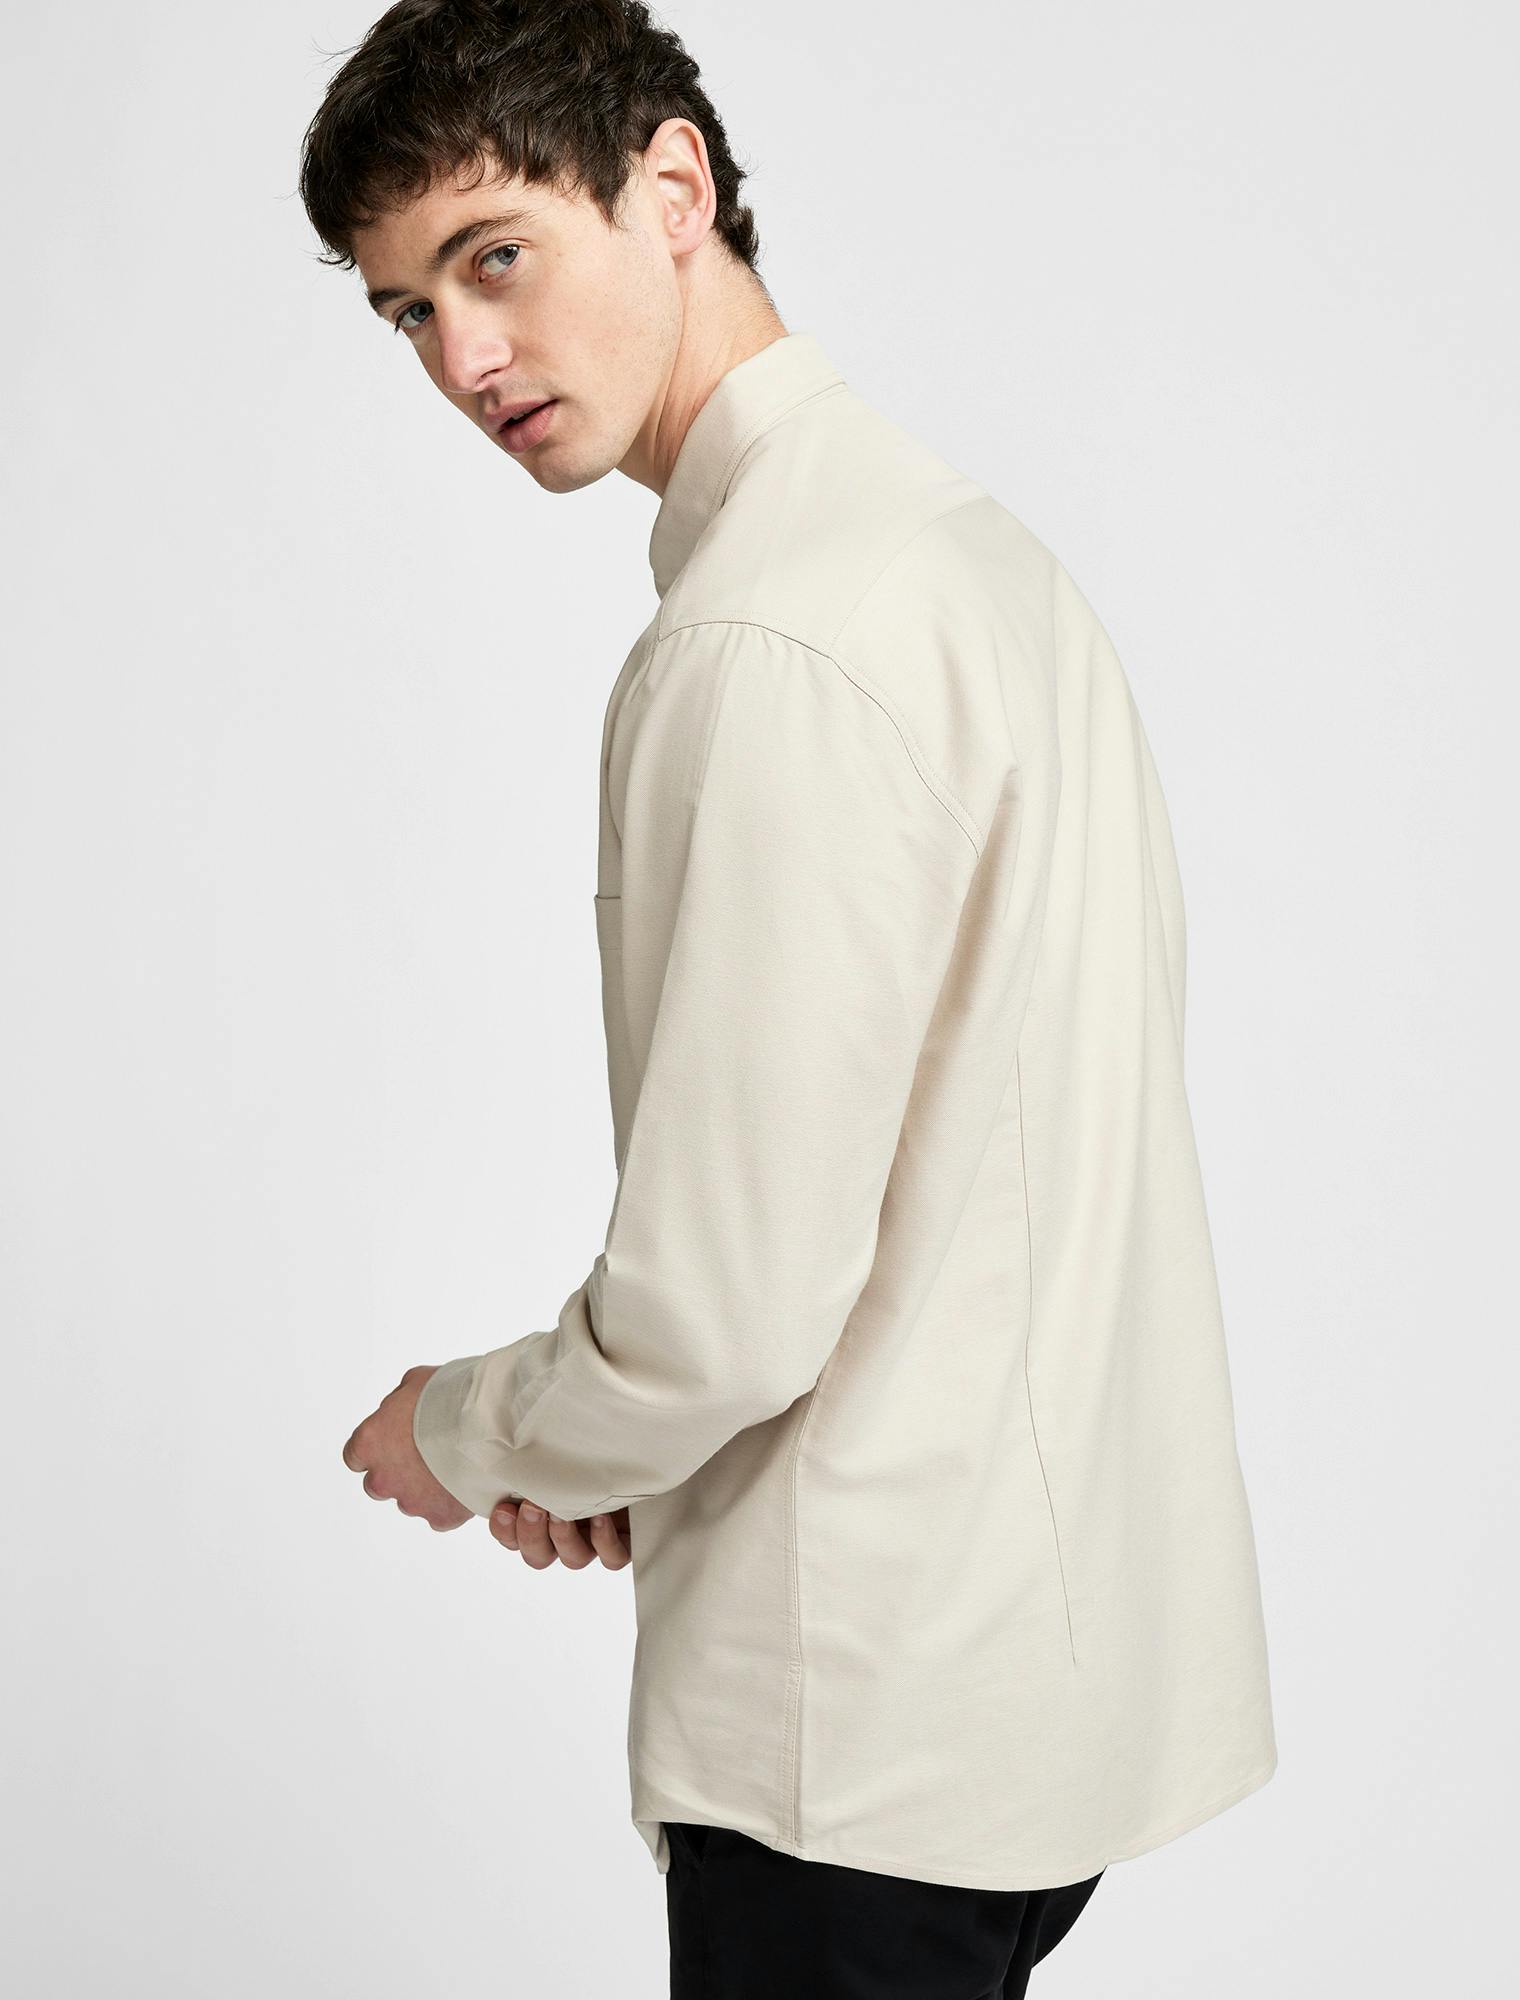 Men's Smith Oxford Long Sleeve Shirt in Oatmeal cotton